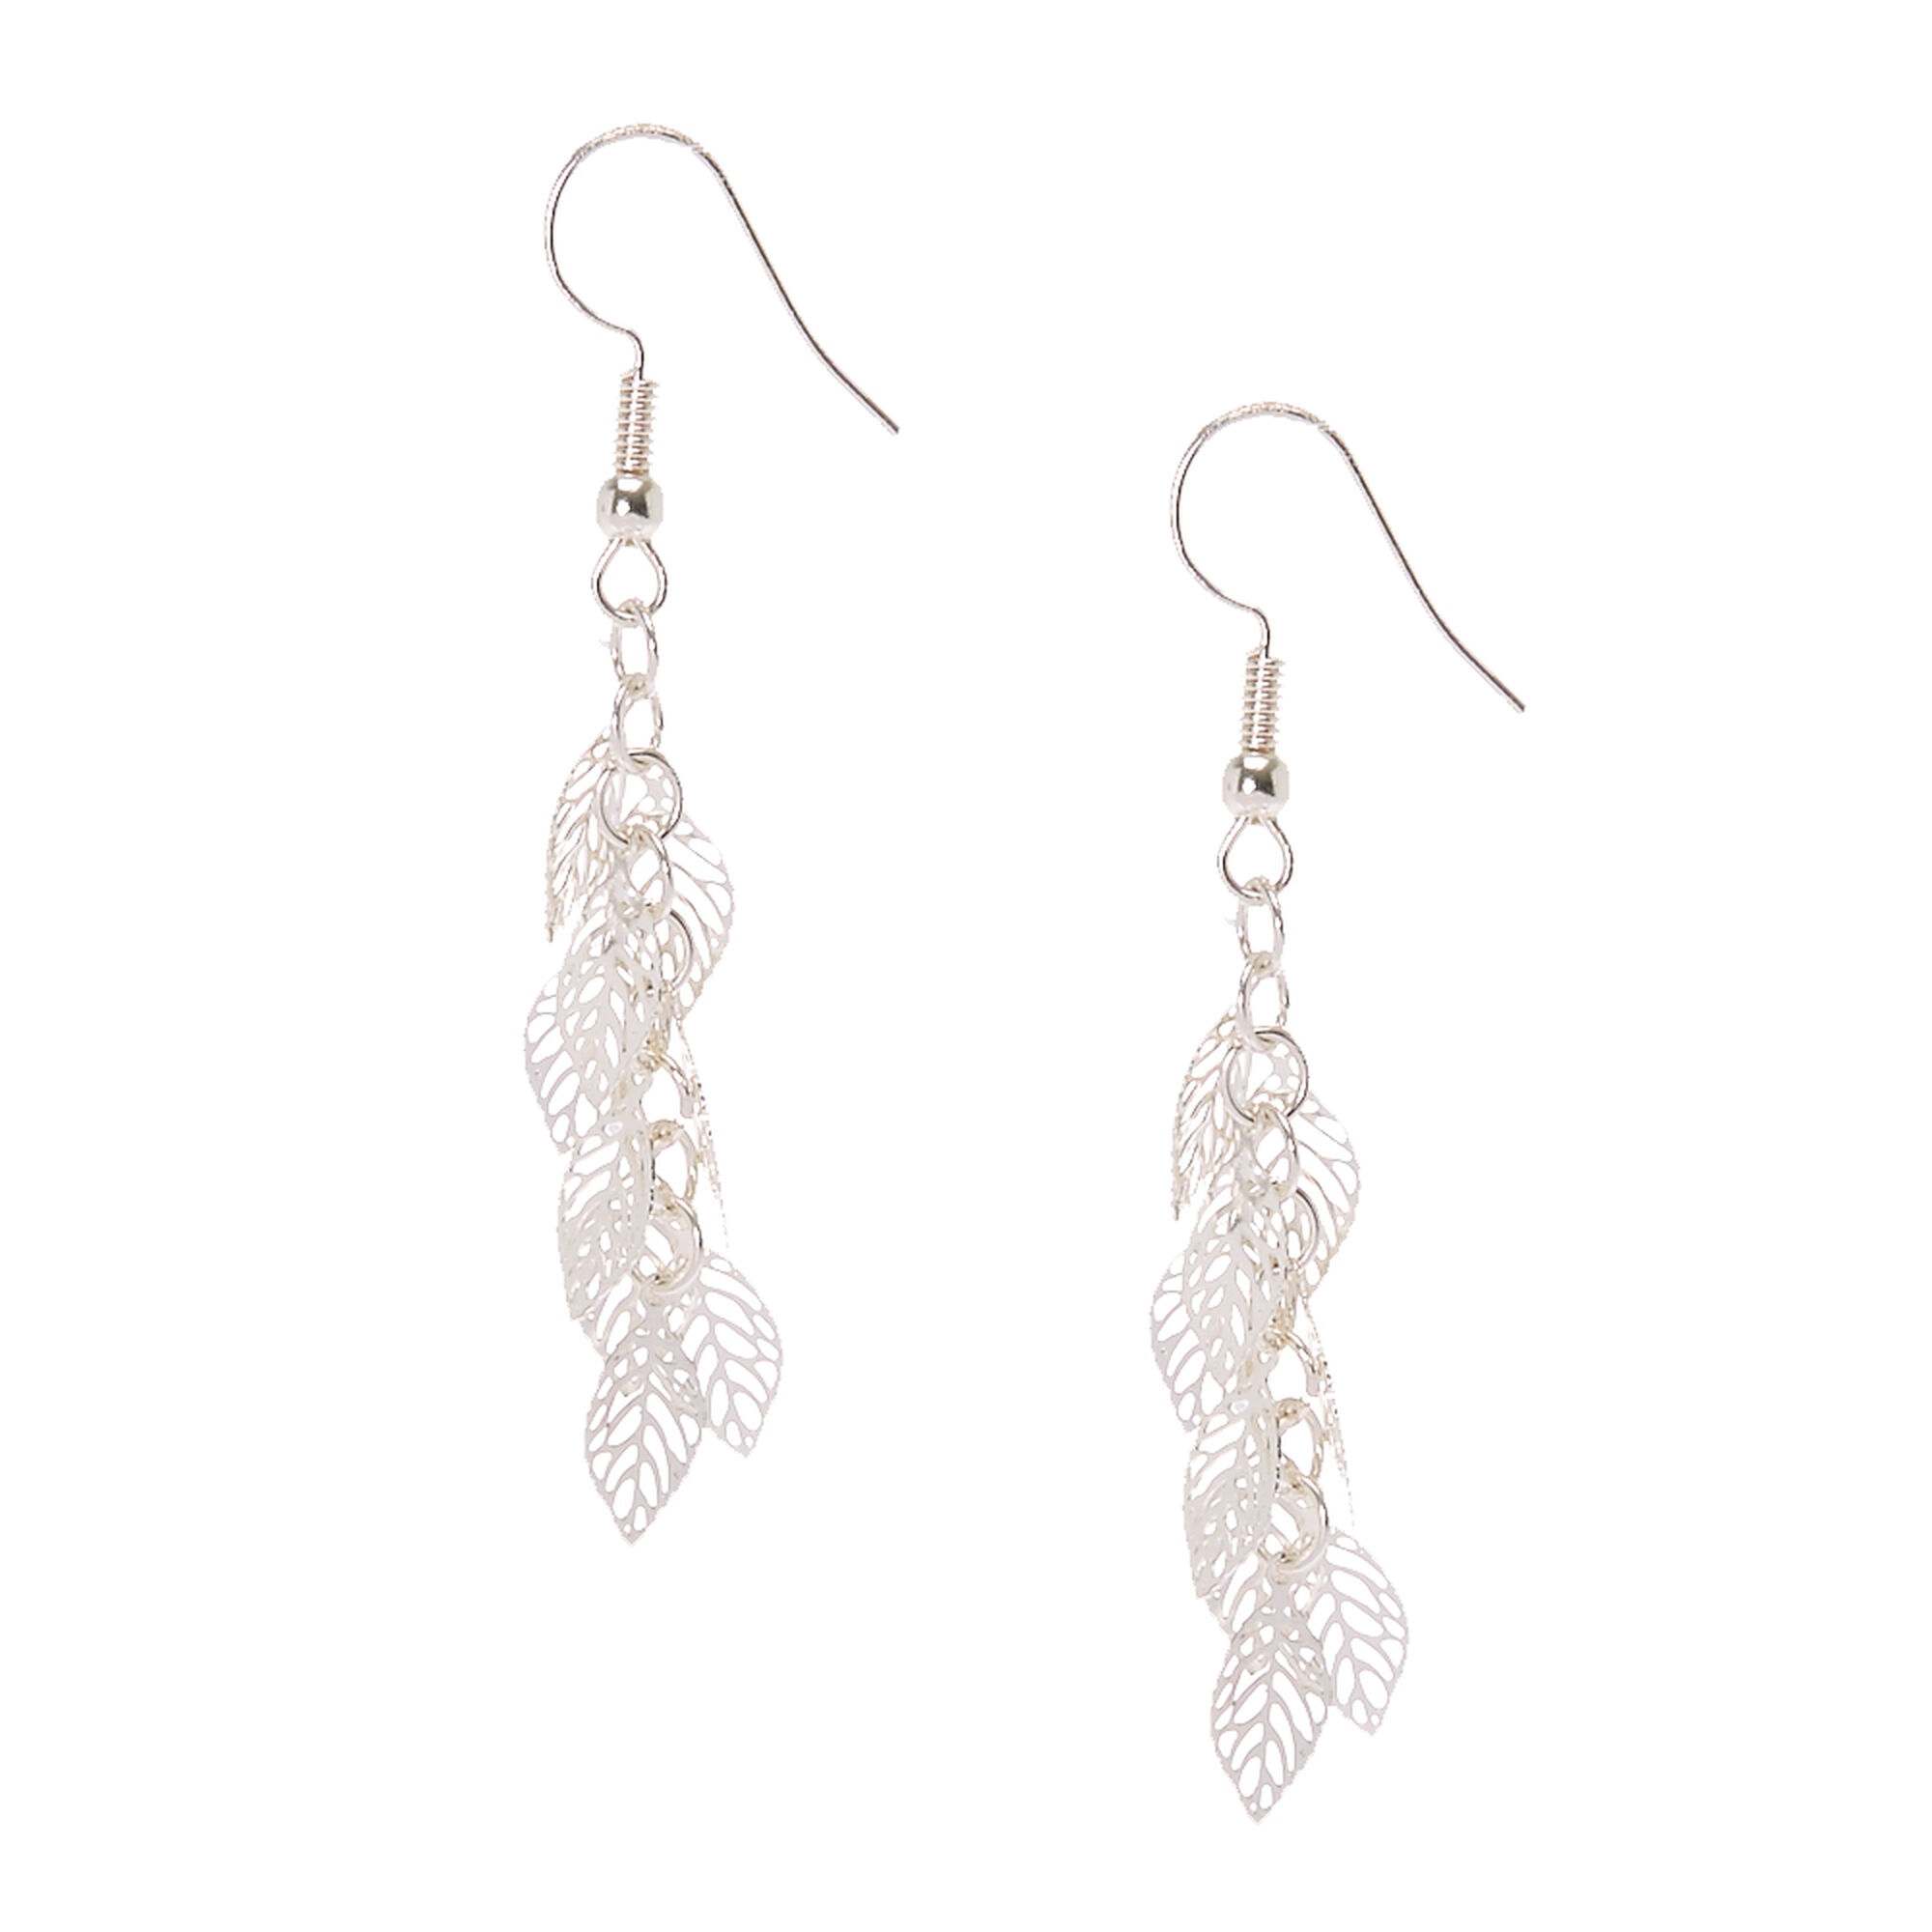 View Claires Tone Filigree Leaf Drop Earrings Silver information